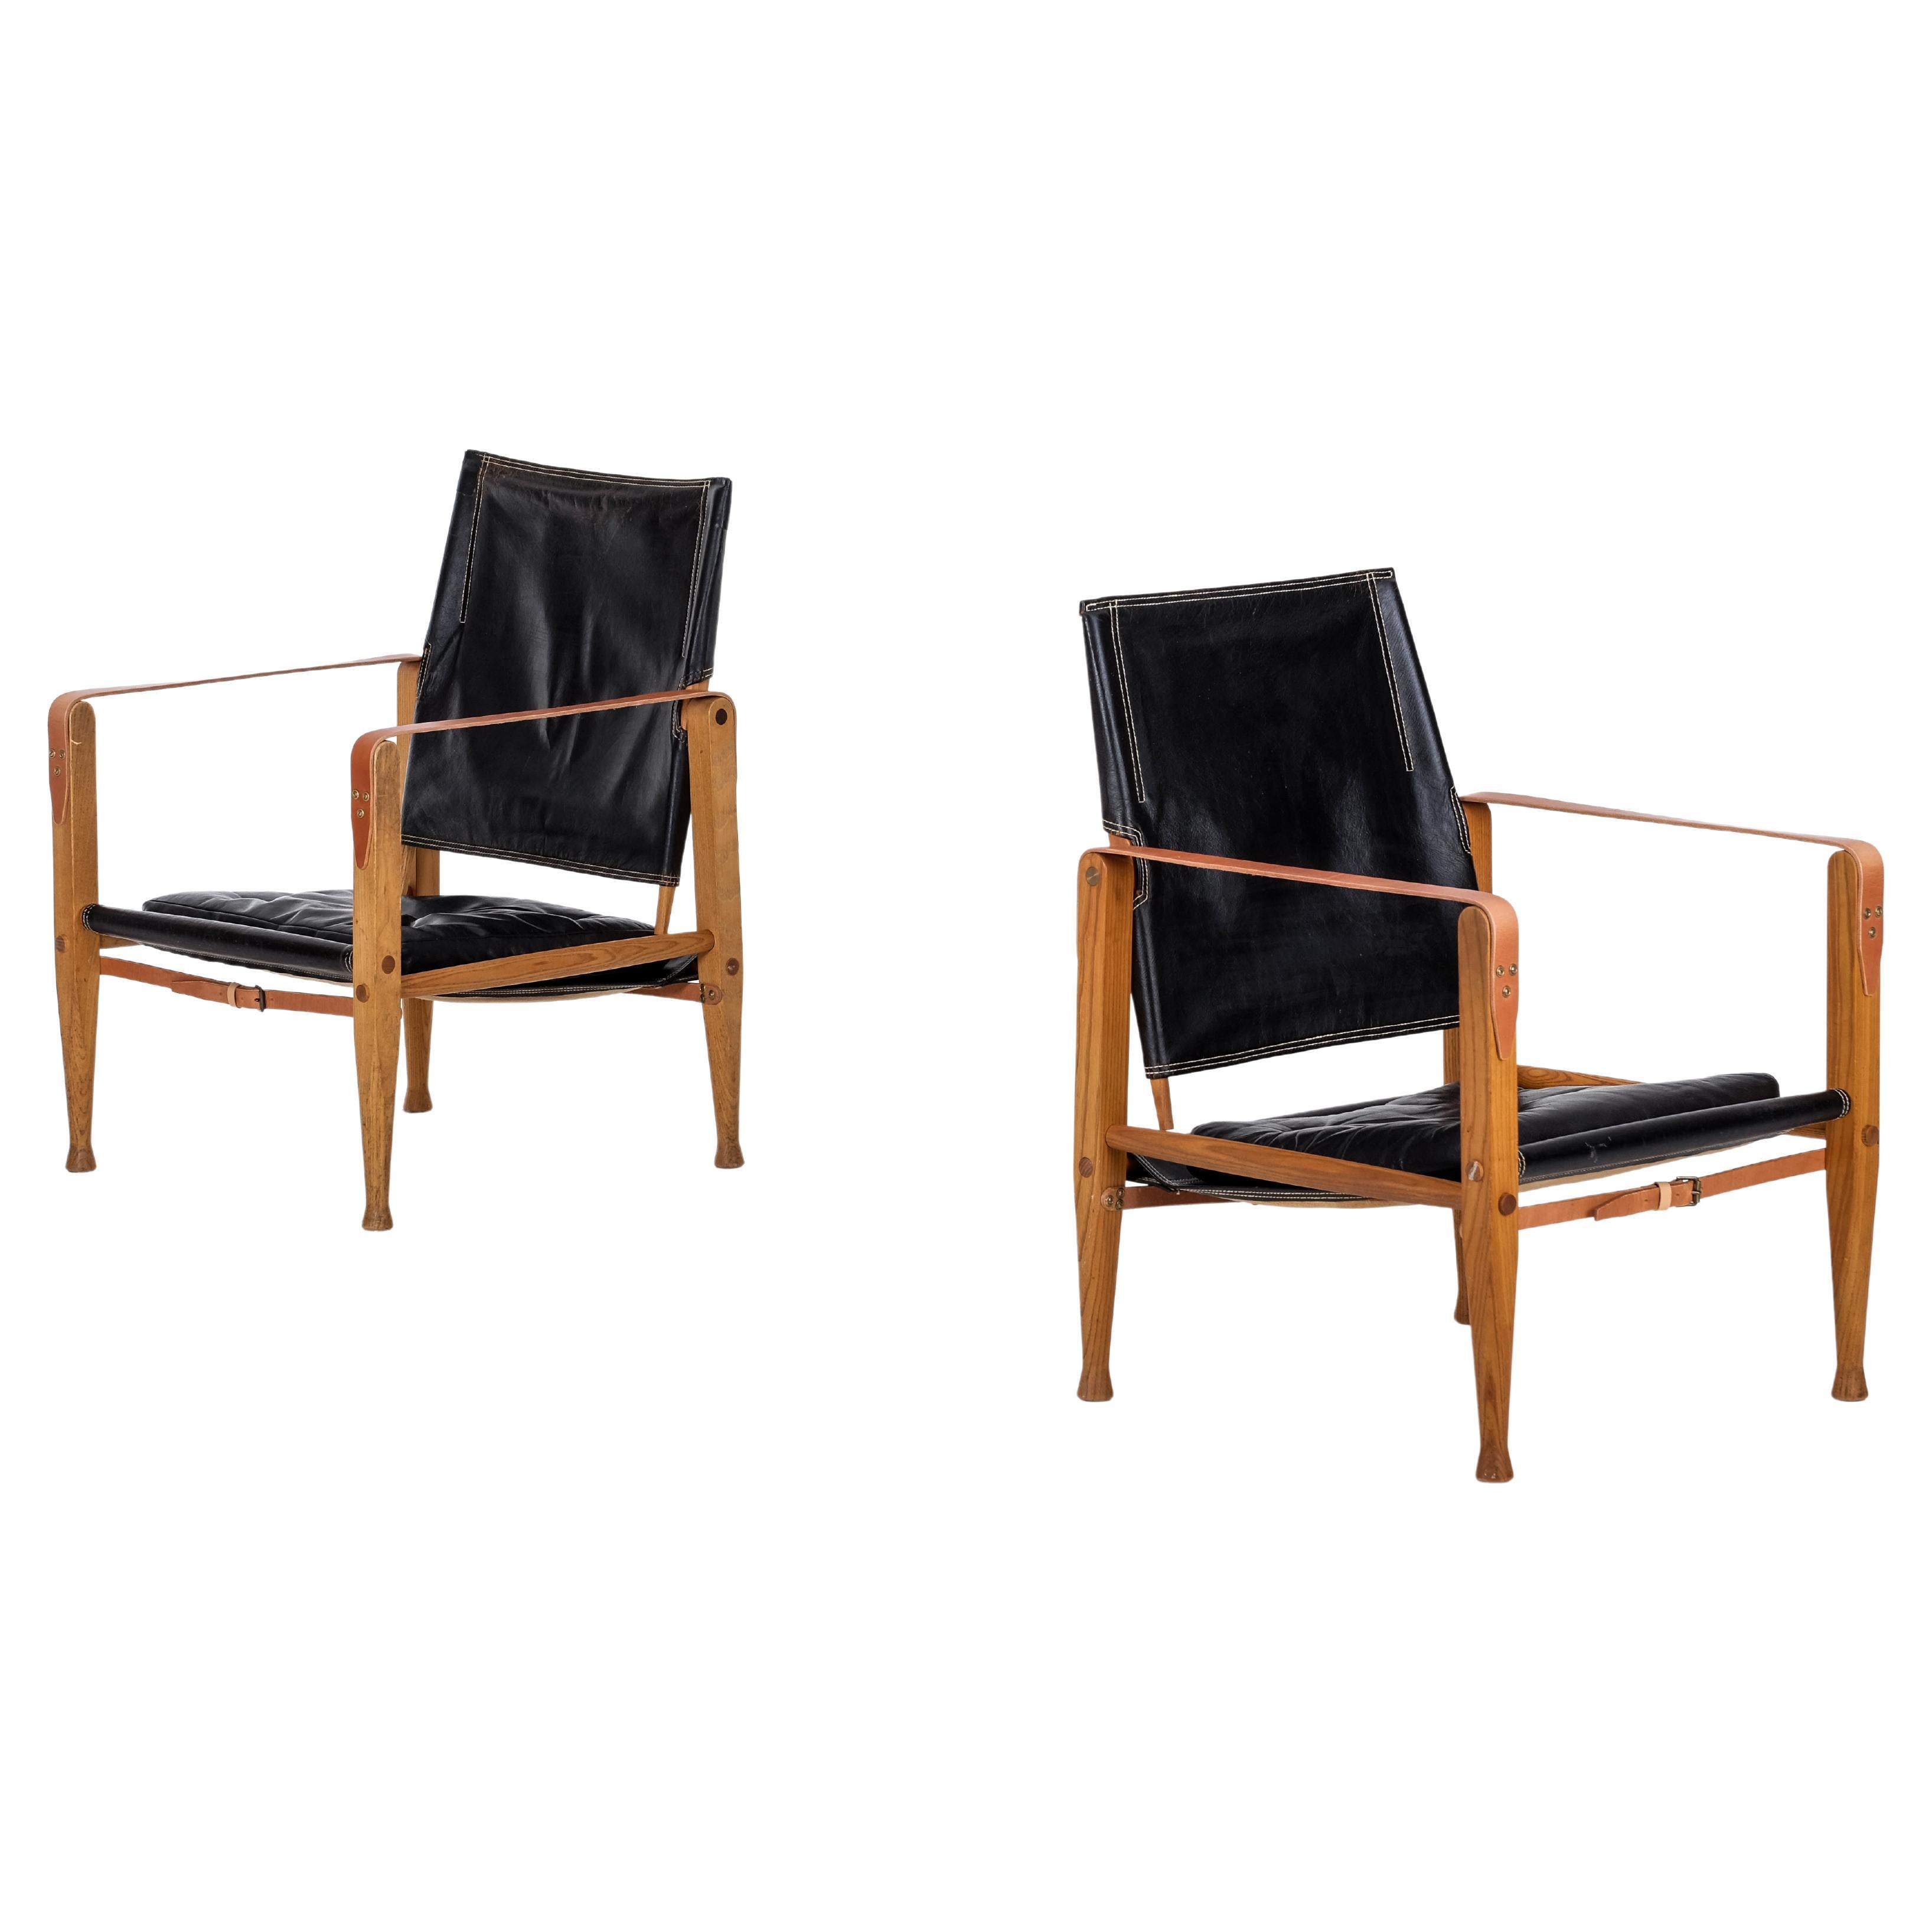 Pair of Kaare Klint Black Leather Safari Chairs, 1960s For Sale